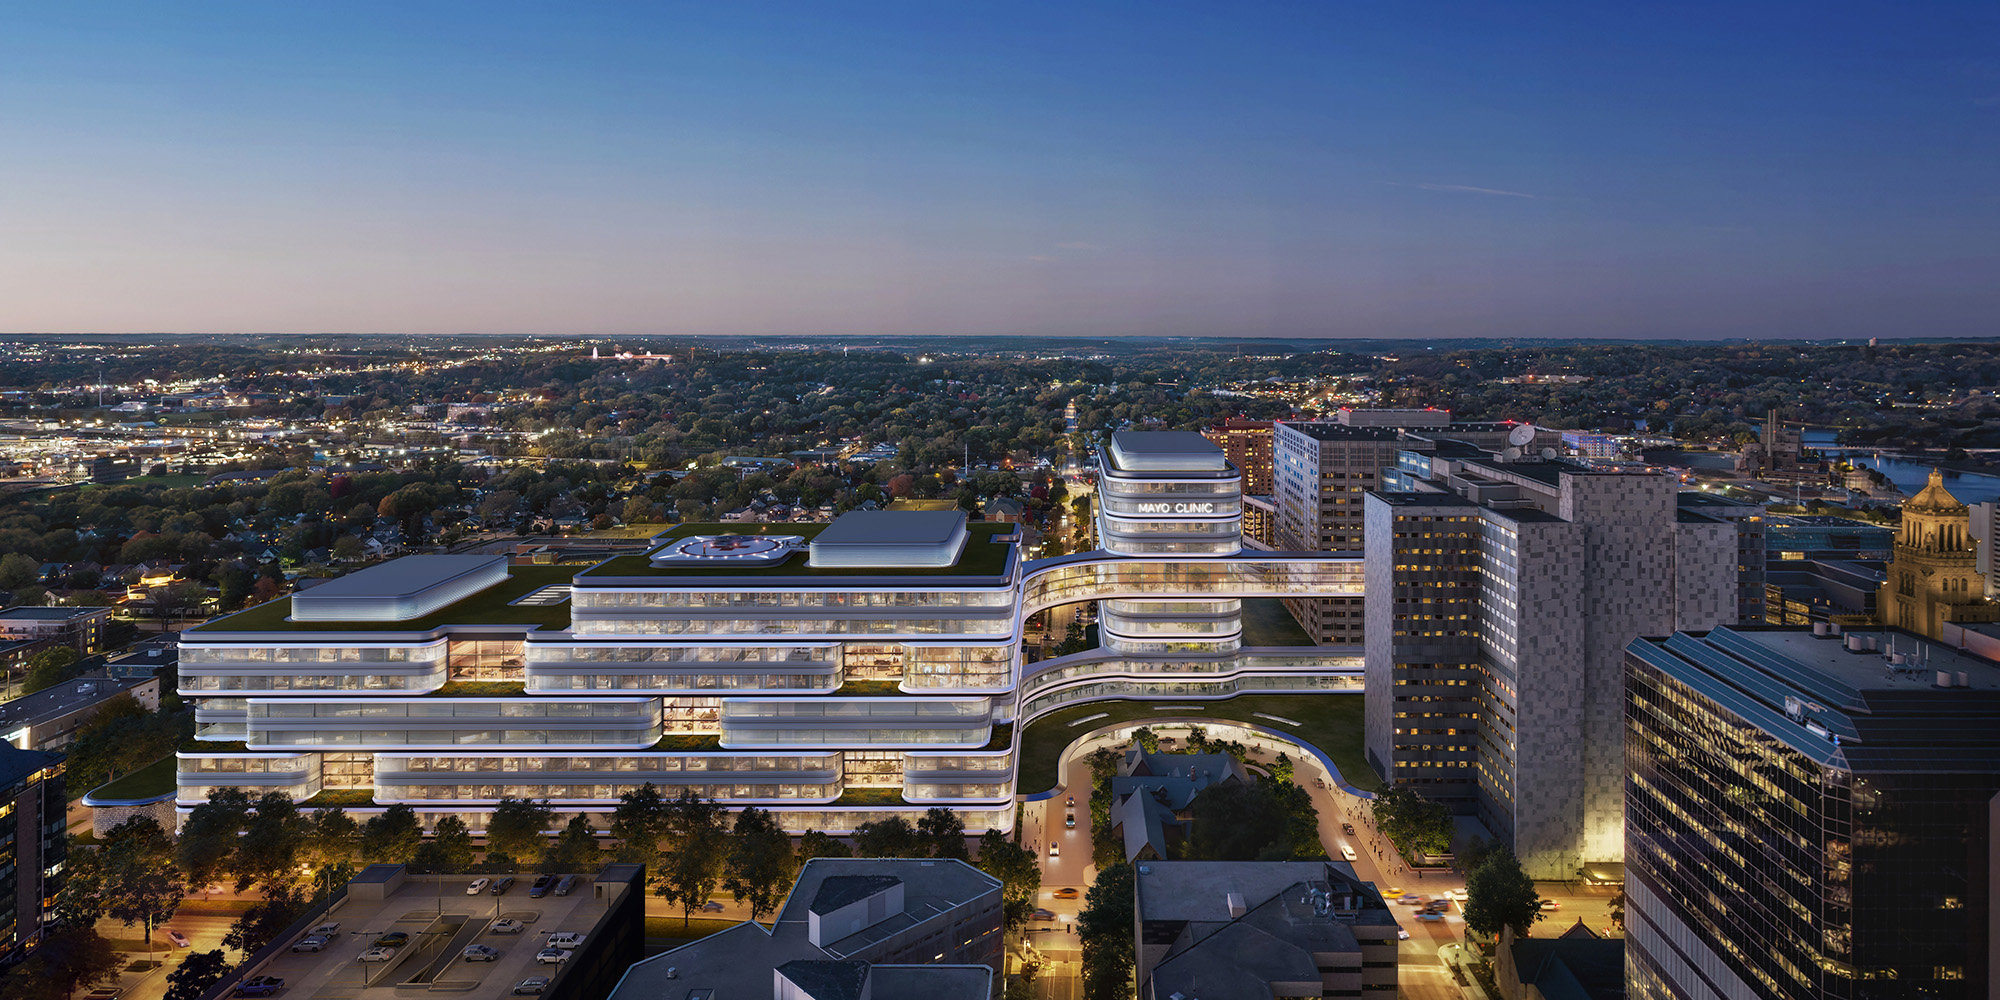 Foster + Partners And Cannondesign Selected To Design Transformative Healthcare Project For Mayo Clinic; Gilbane Building Company To Lead Construction Management